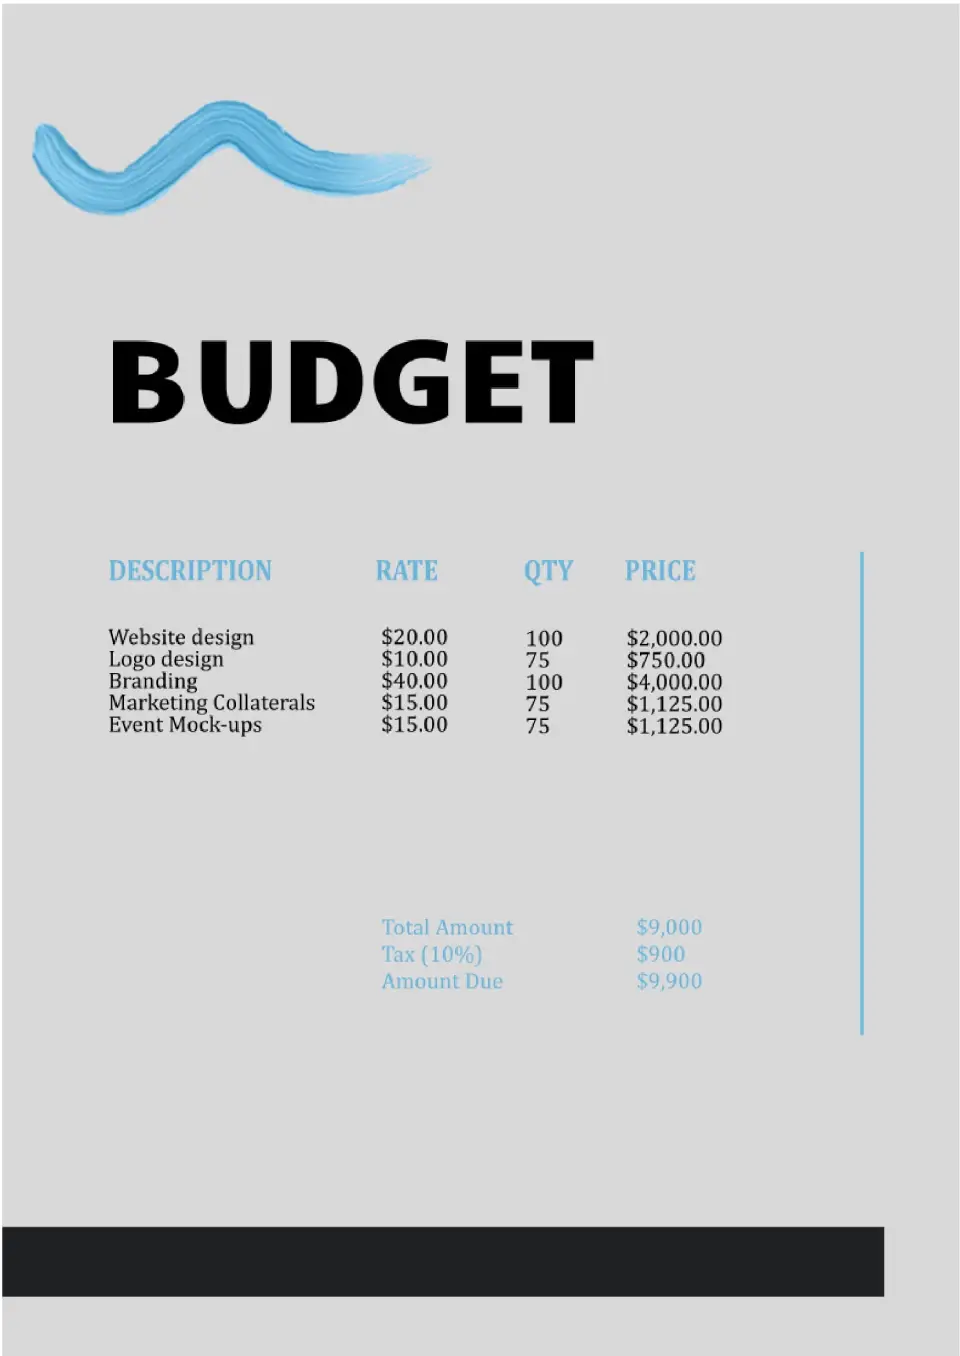 Budget Proposal page-2 Template for Google Docs